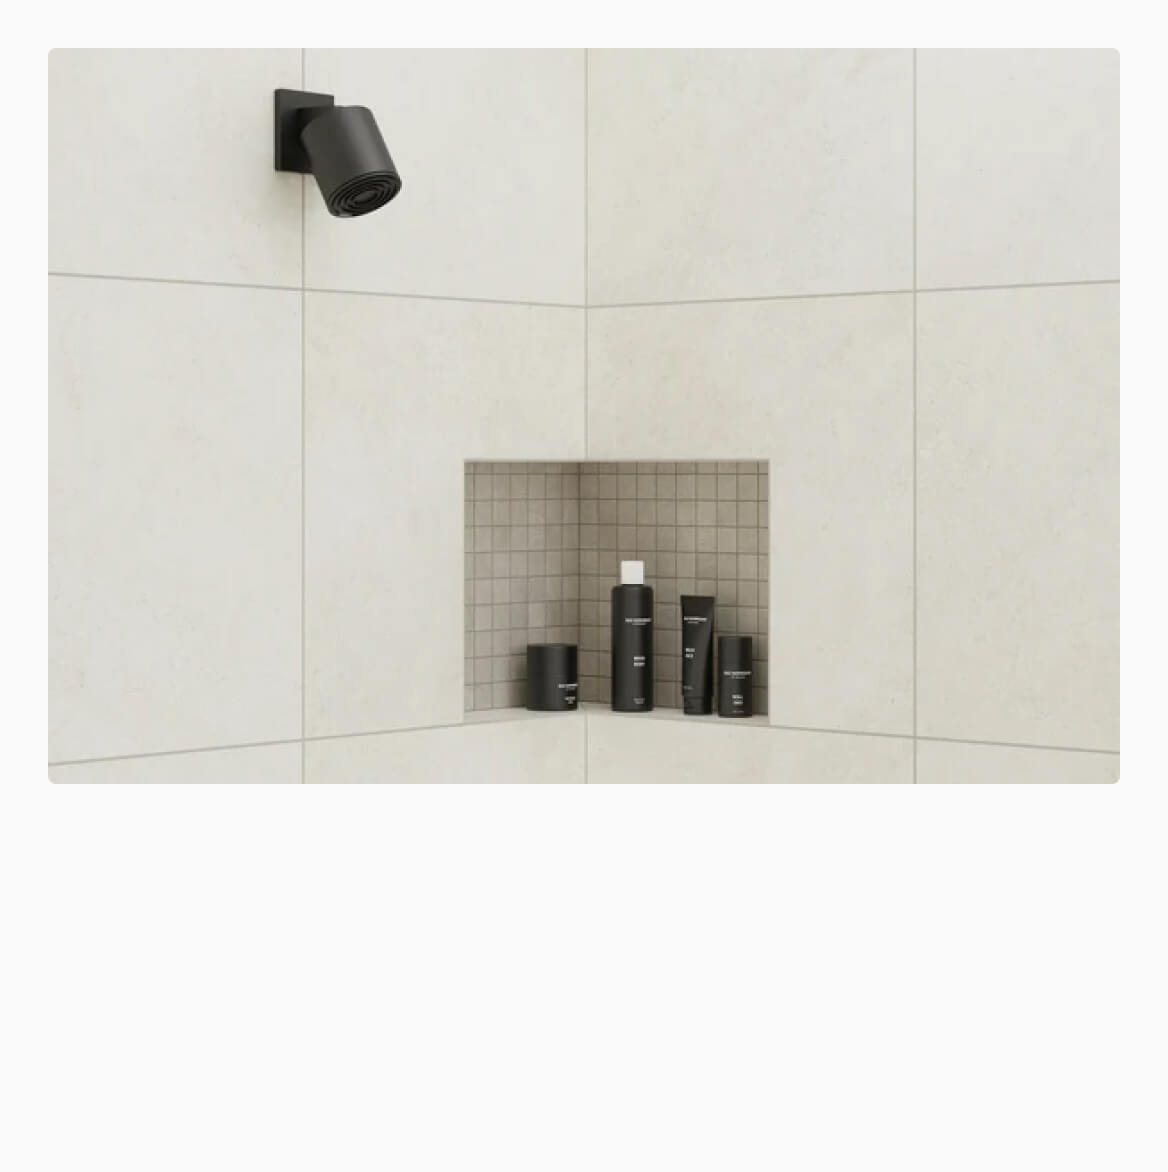 Modern shower niche with contrasting 24x24 tiles and stylish black fixtures